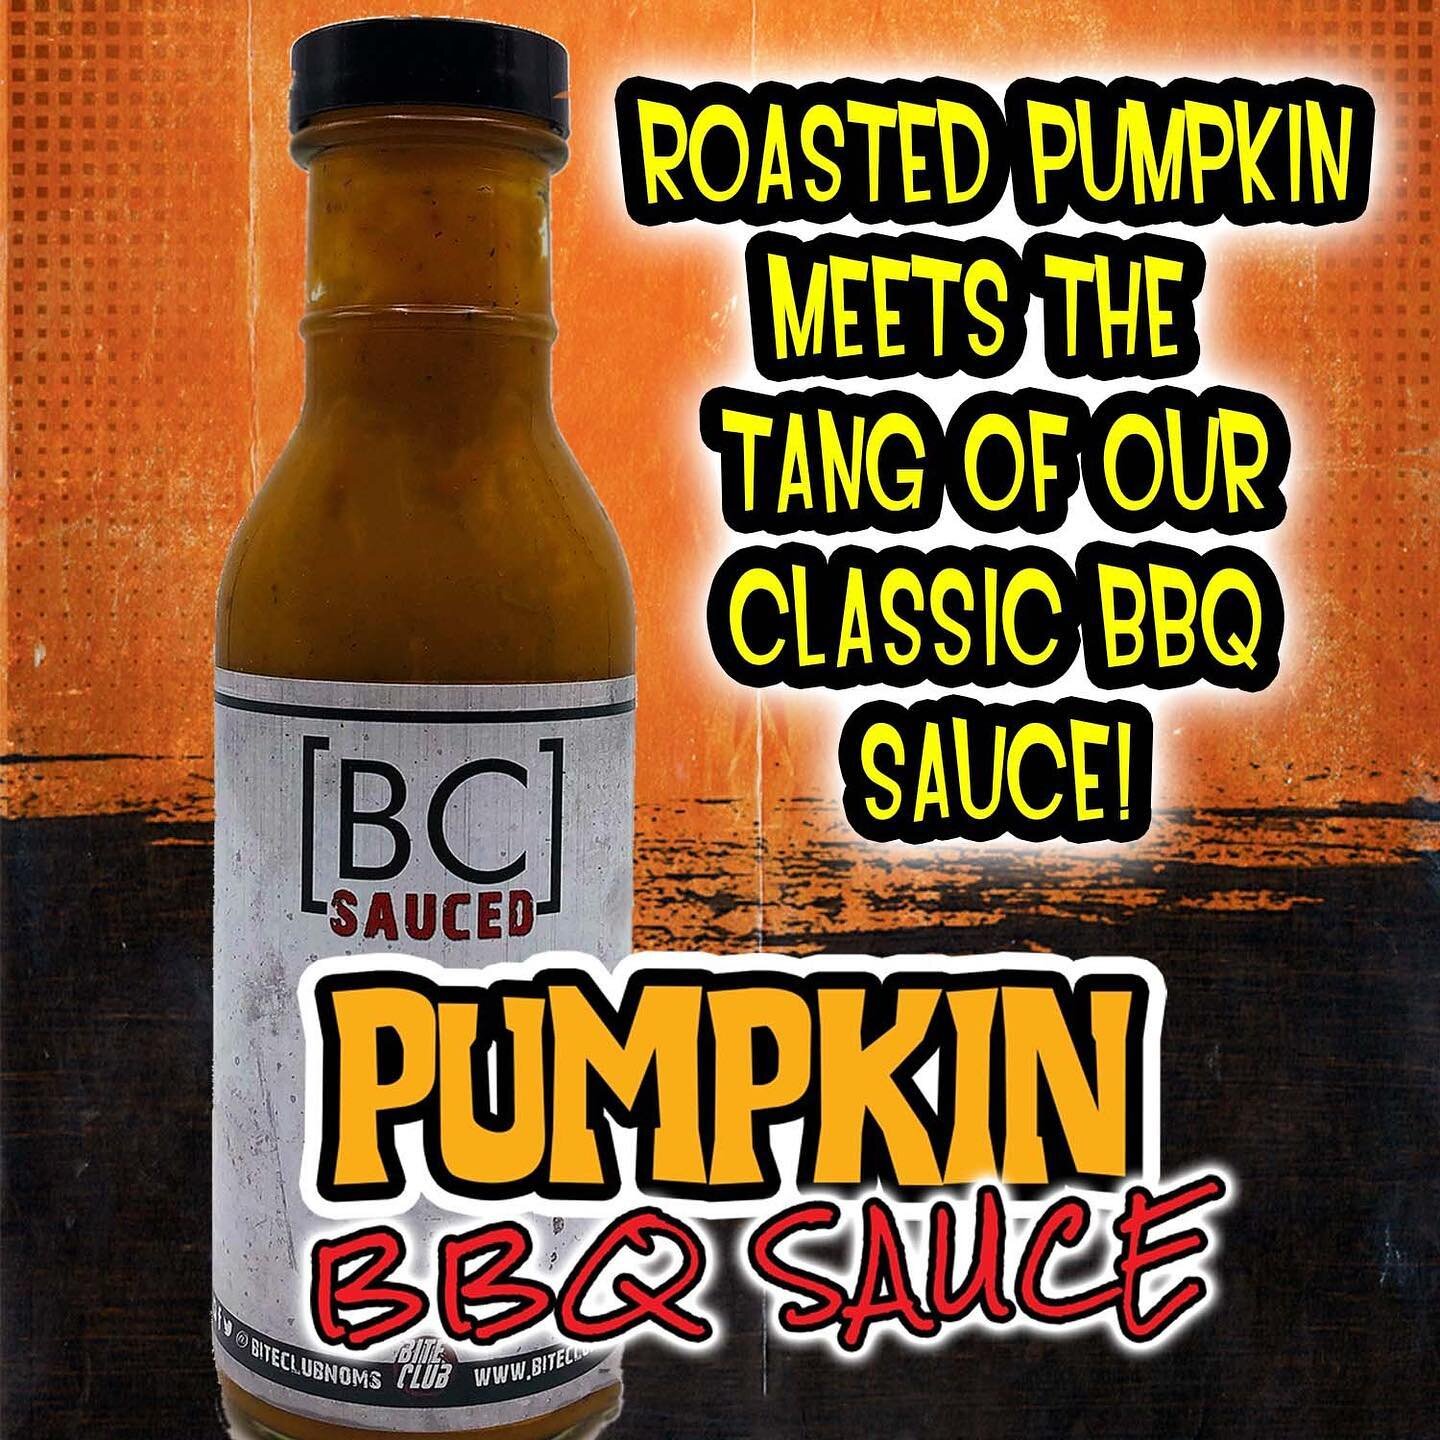 LAST DAY FOR PREORDERS! Closes at midnight, so it's your last chance to try our limited edition seasonal bbq sauce! 

#bbq #pumpkin #limitededition